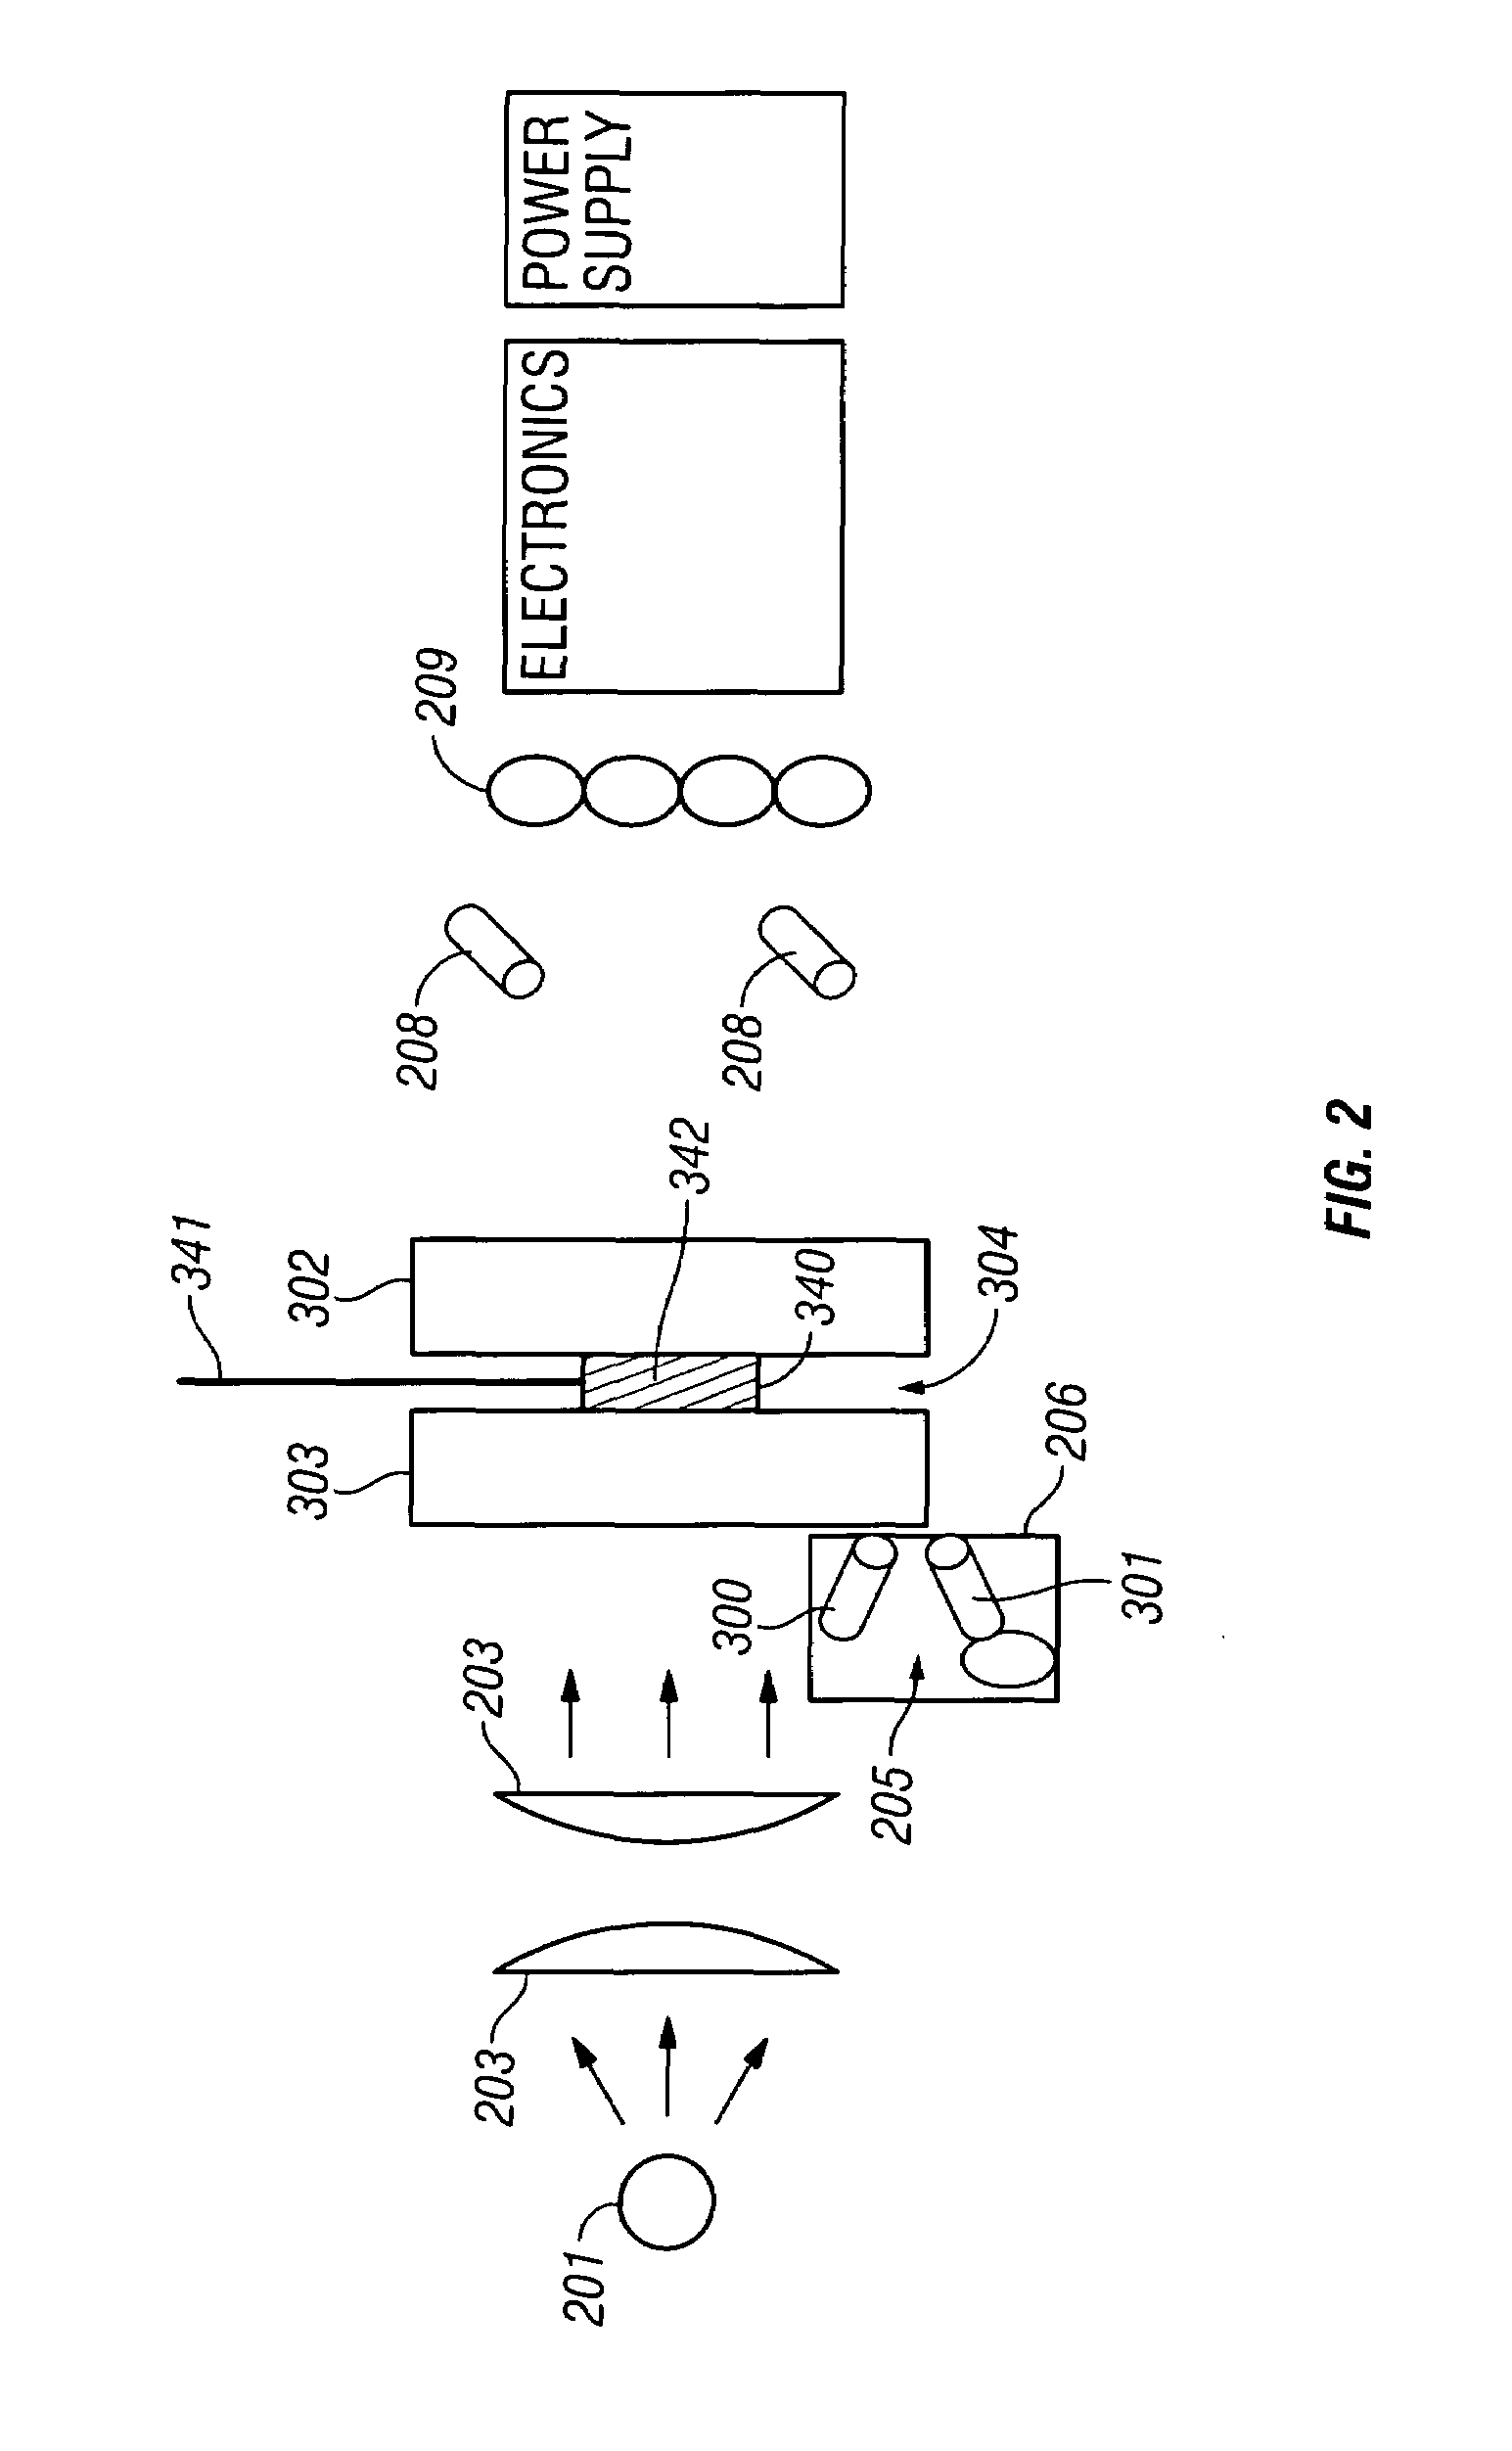 Method and apparatus for a downhole refractometer and attenuated reflectance spectrometer